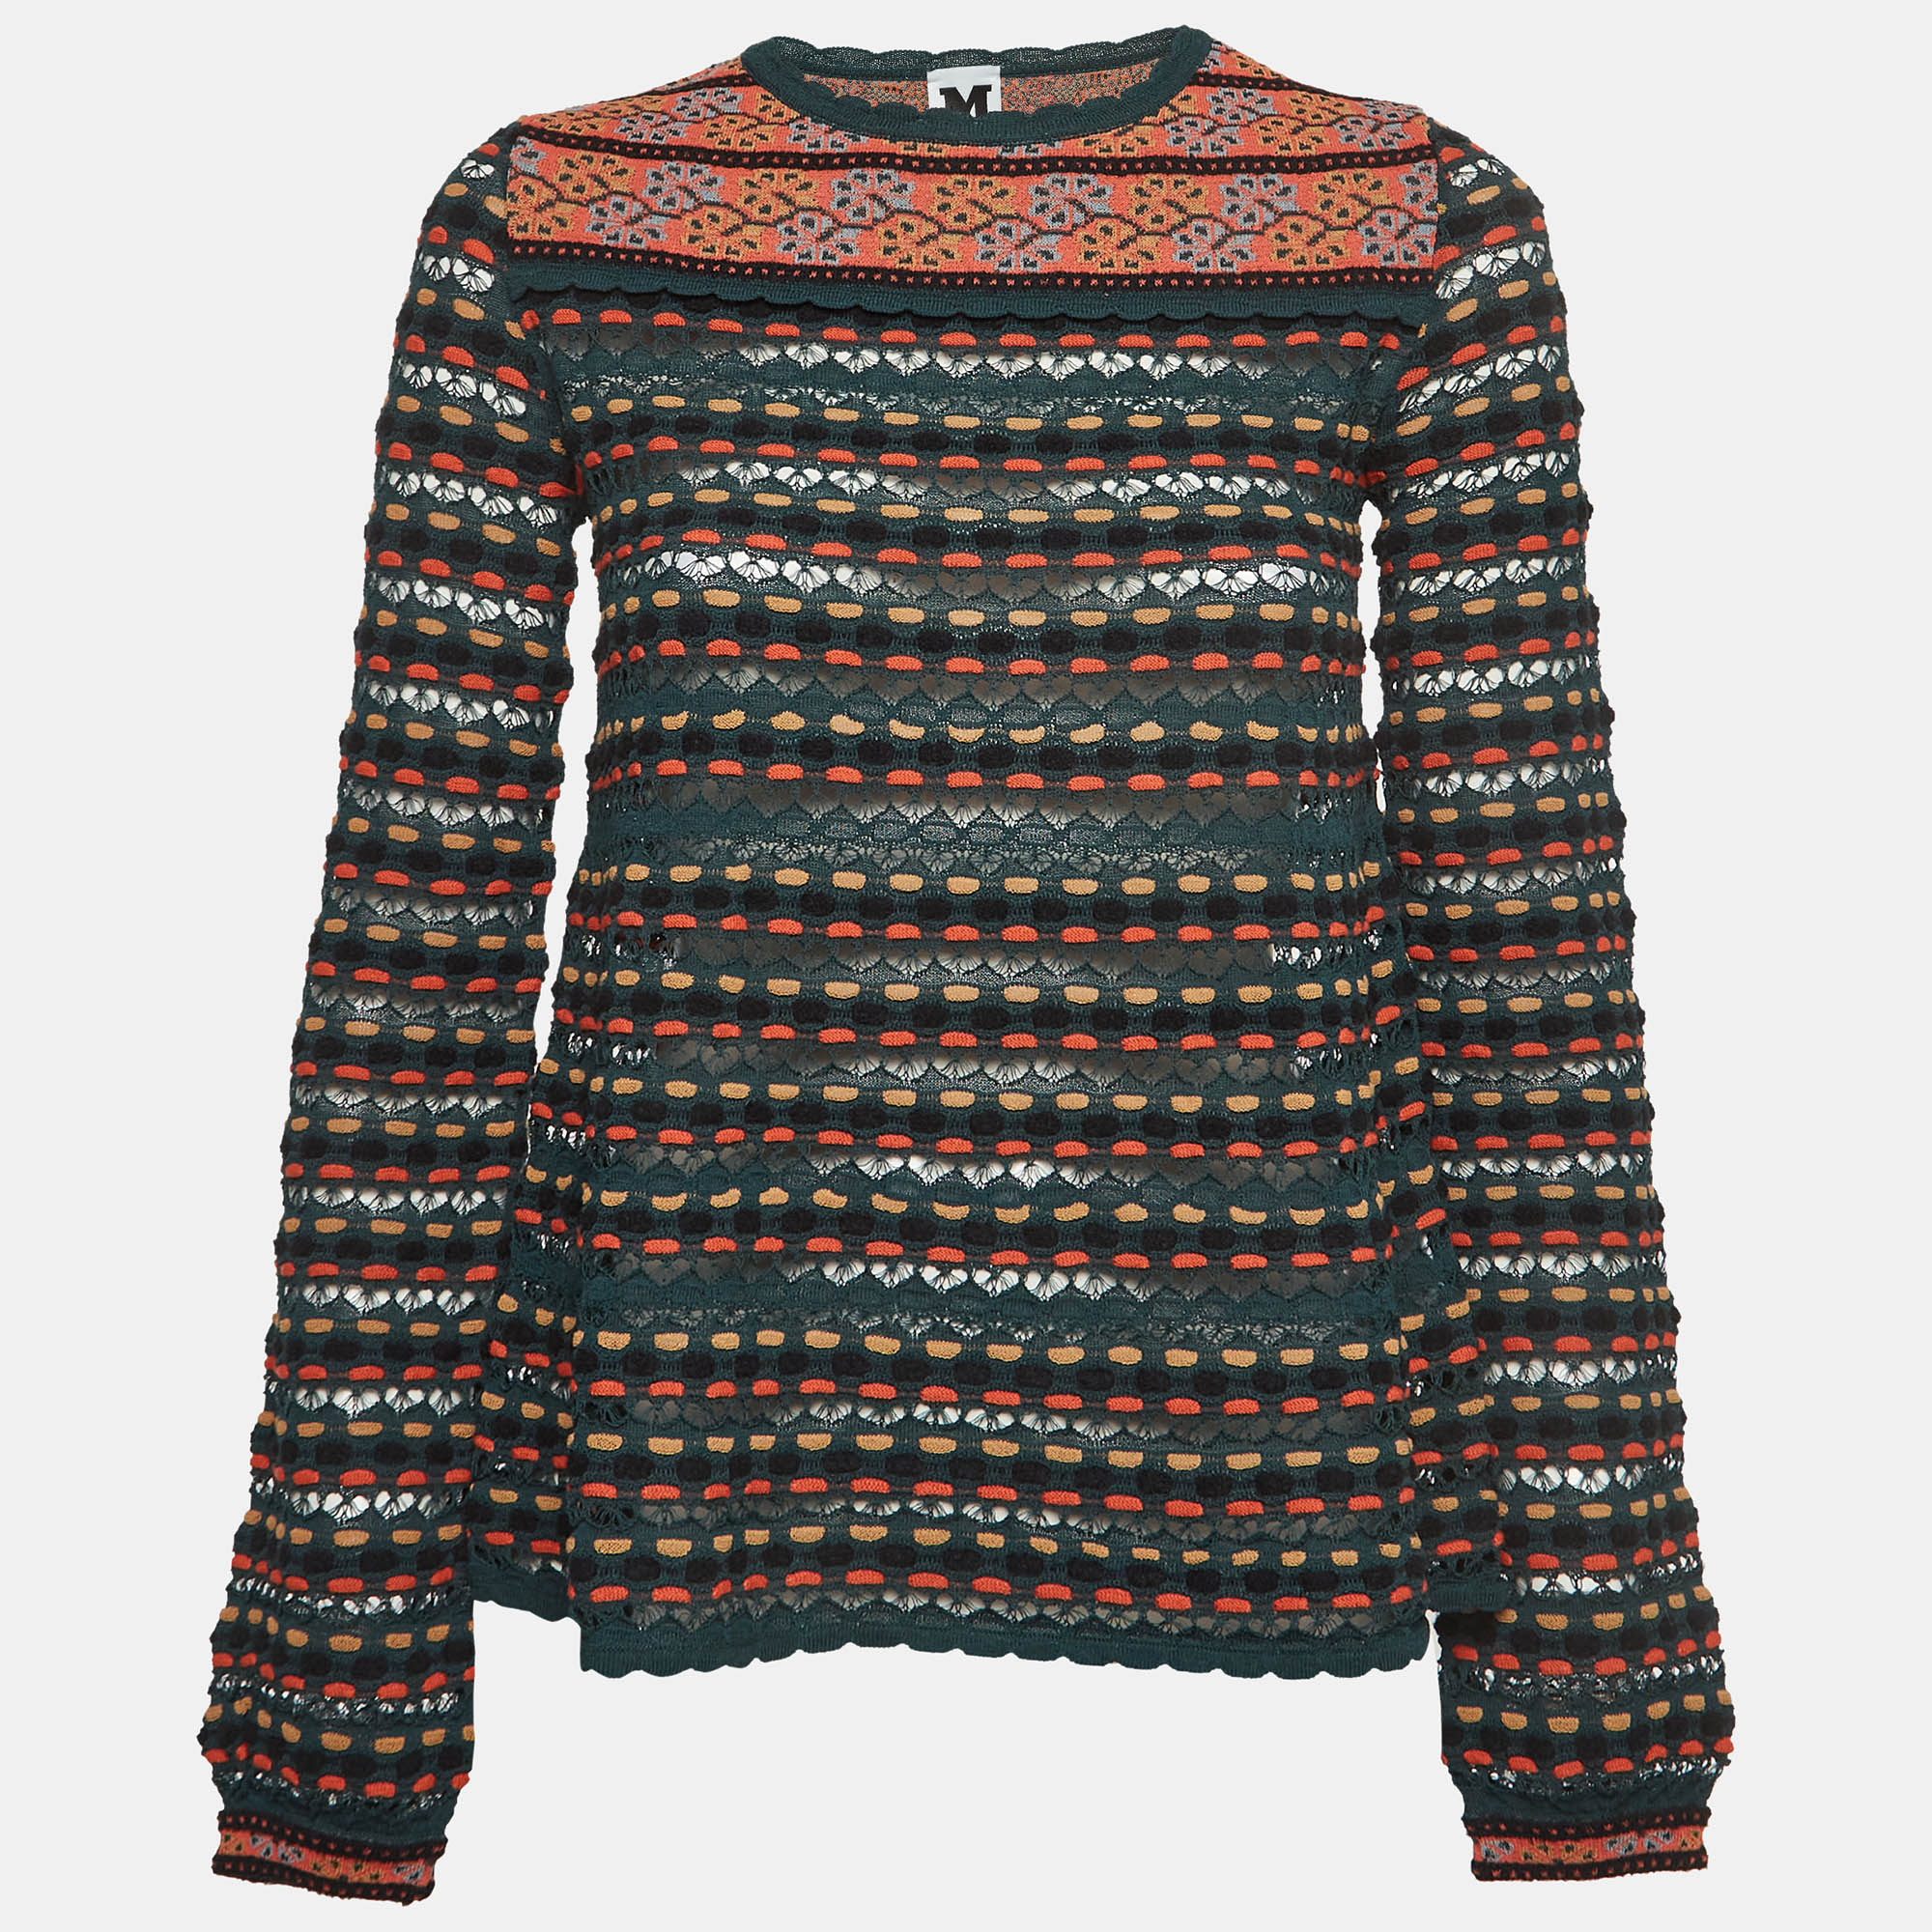 M missoni multicolor patterned knit long sleeve top s